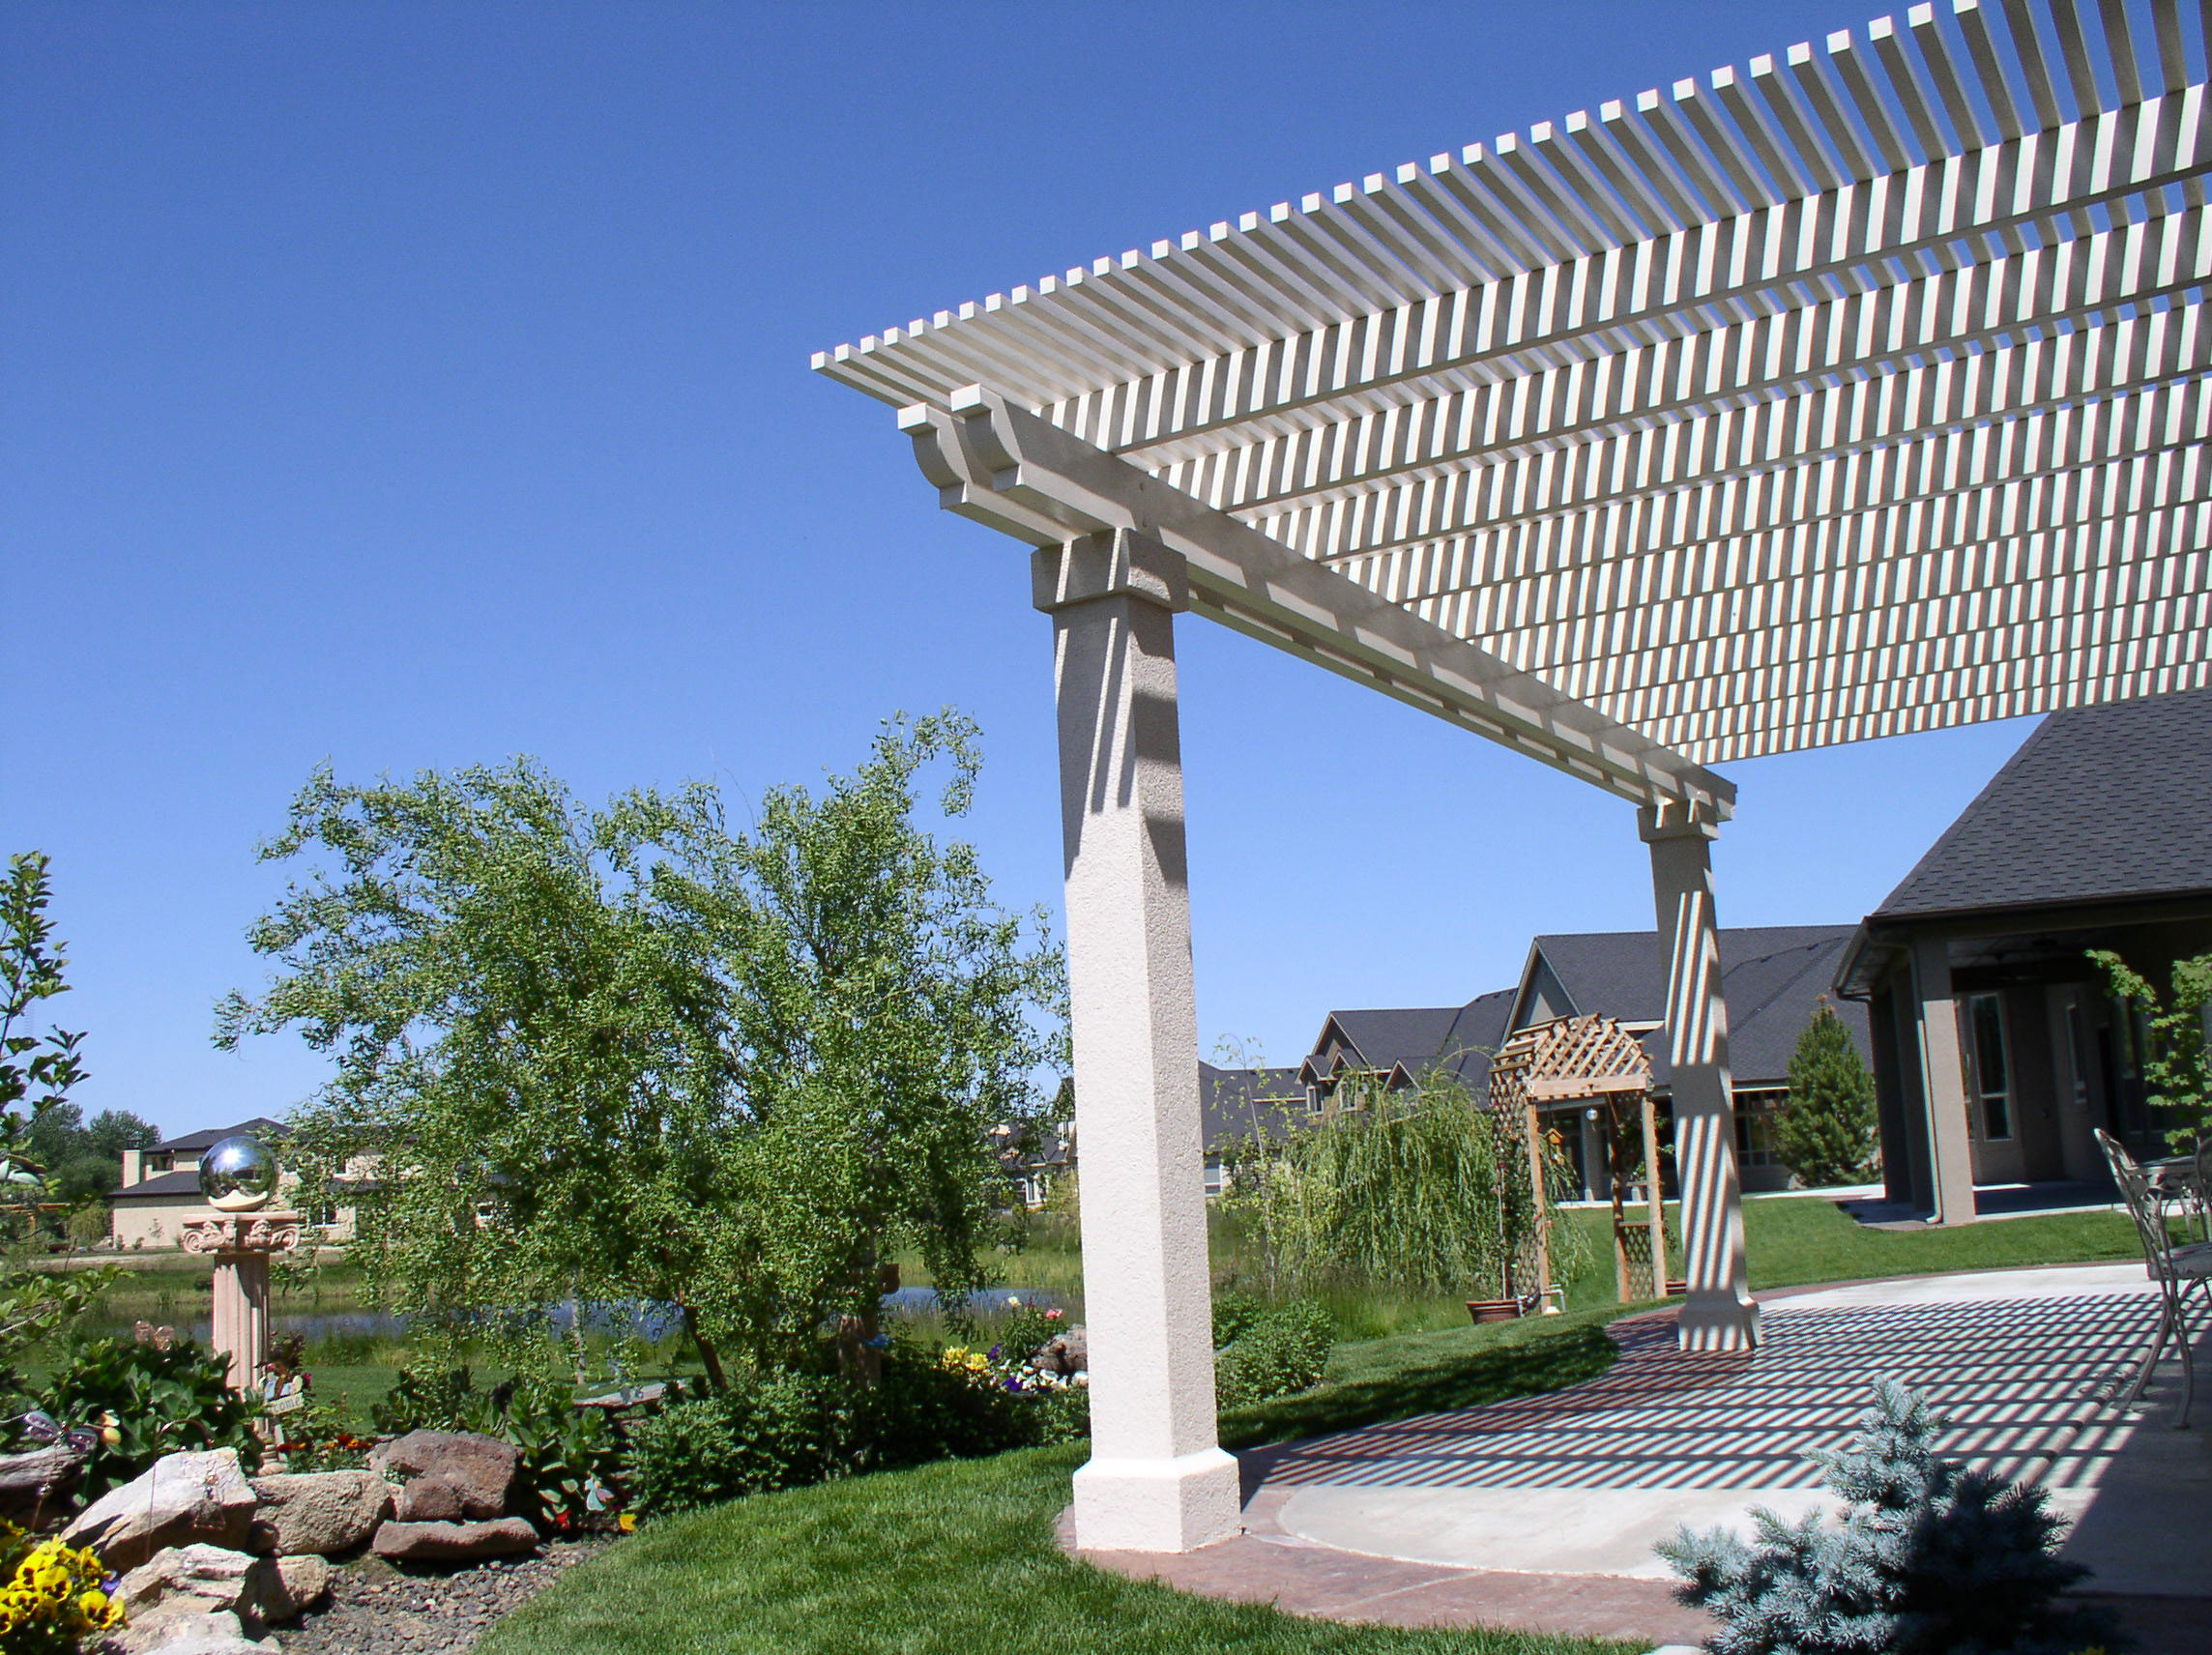 Remodel Your Patio with Equinox Louvered Roof Quickly and Easily